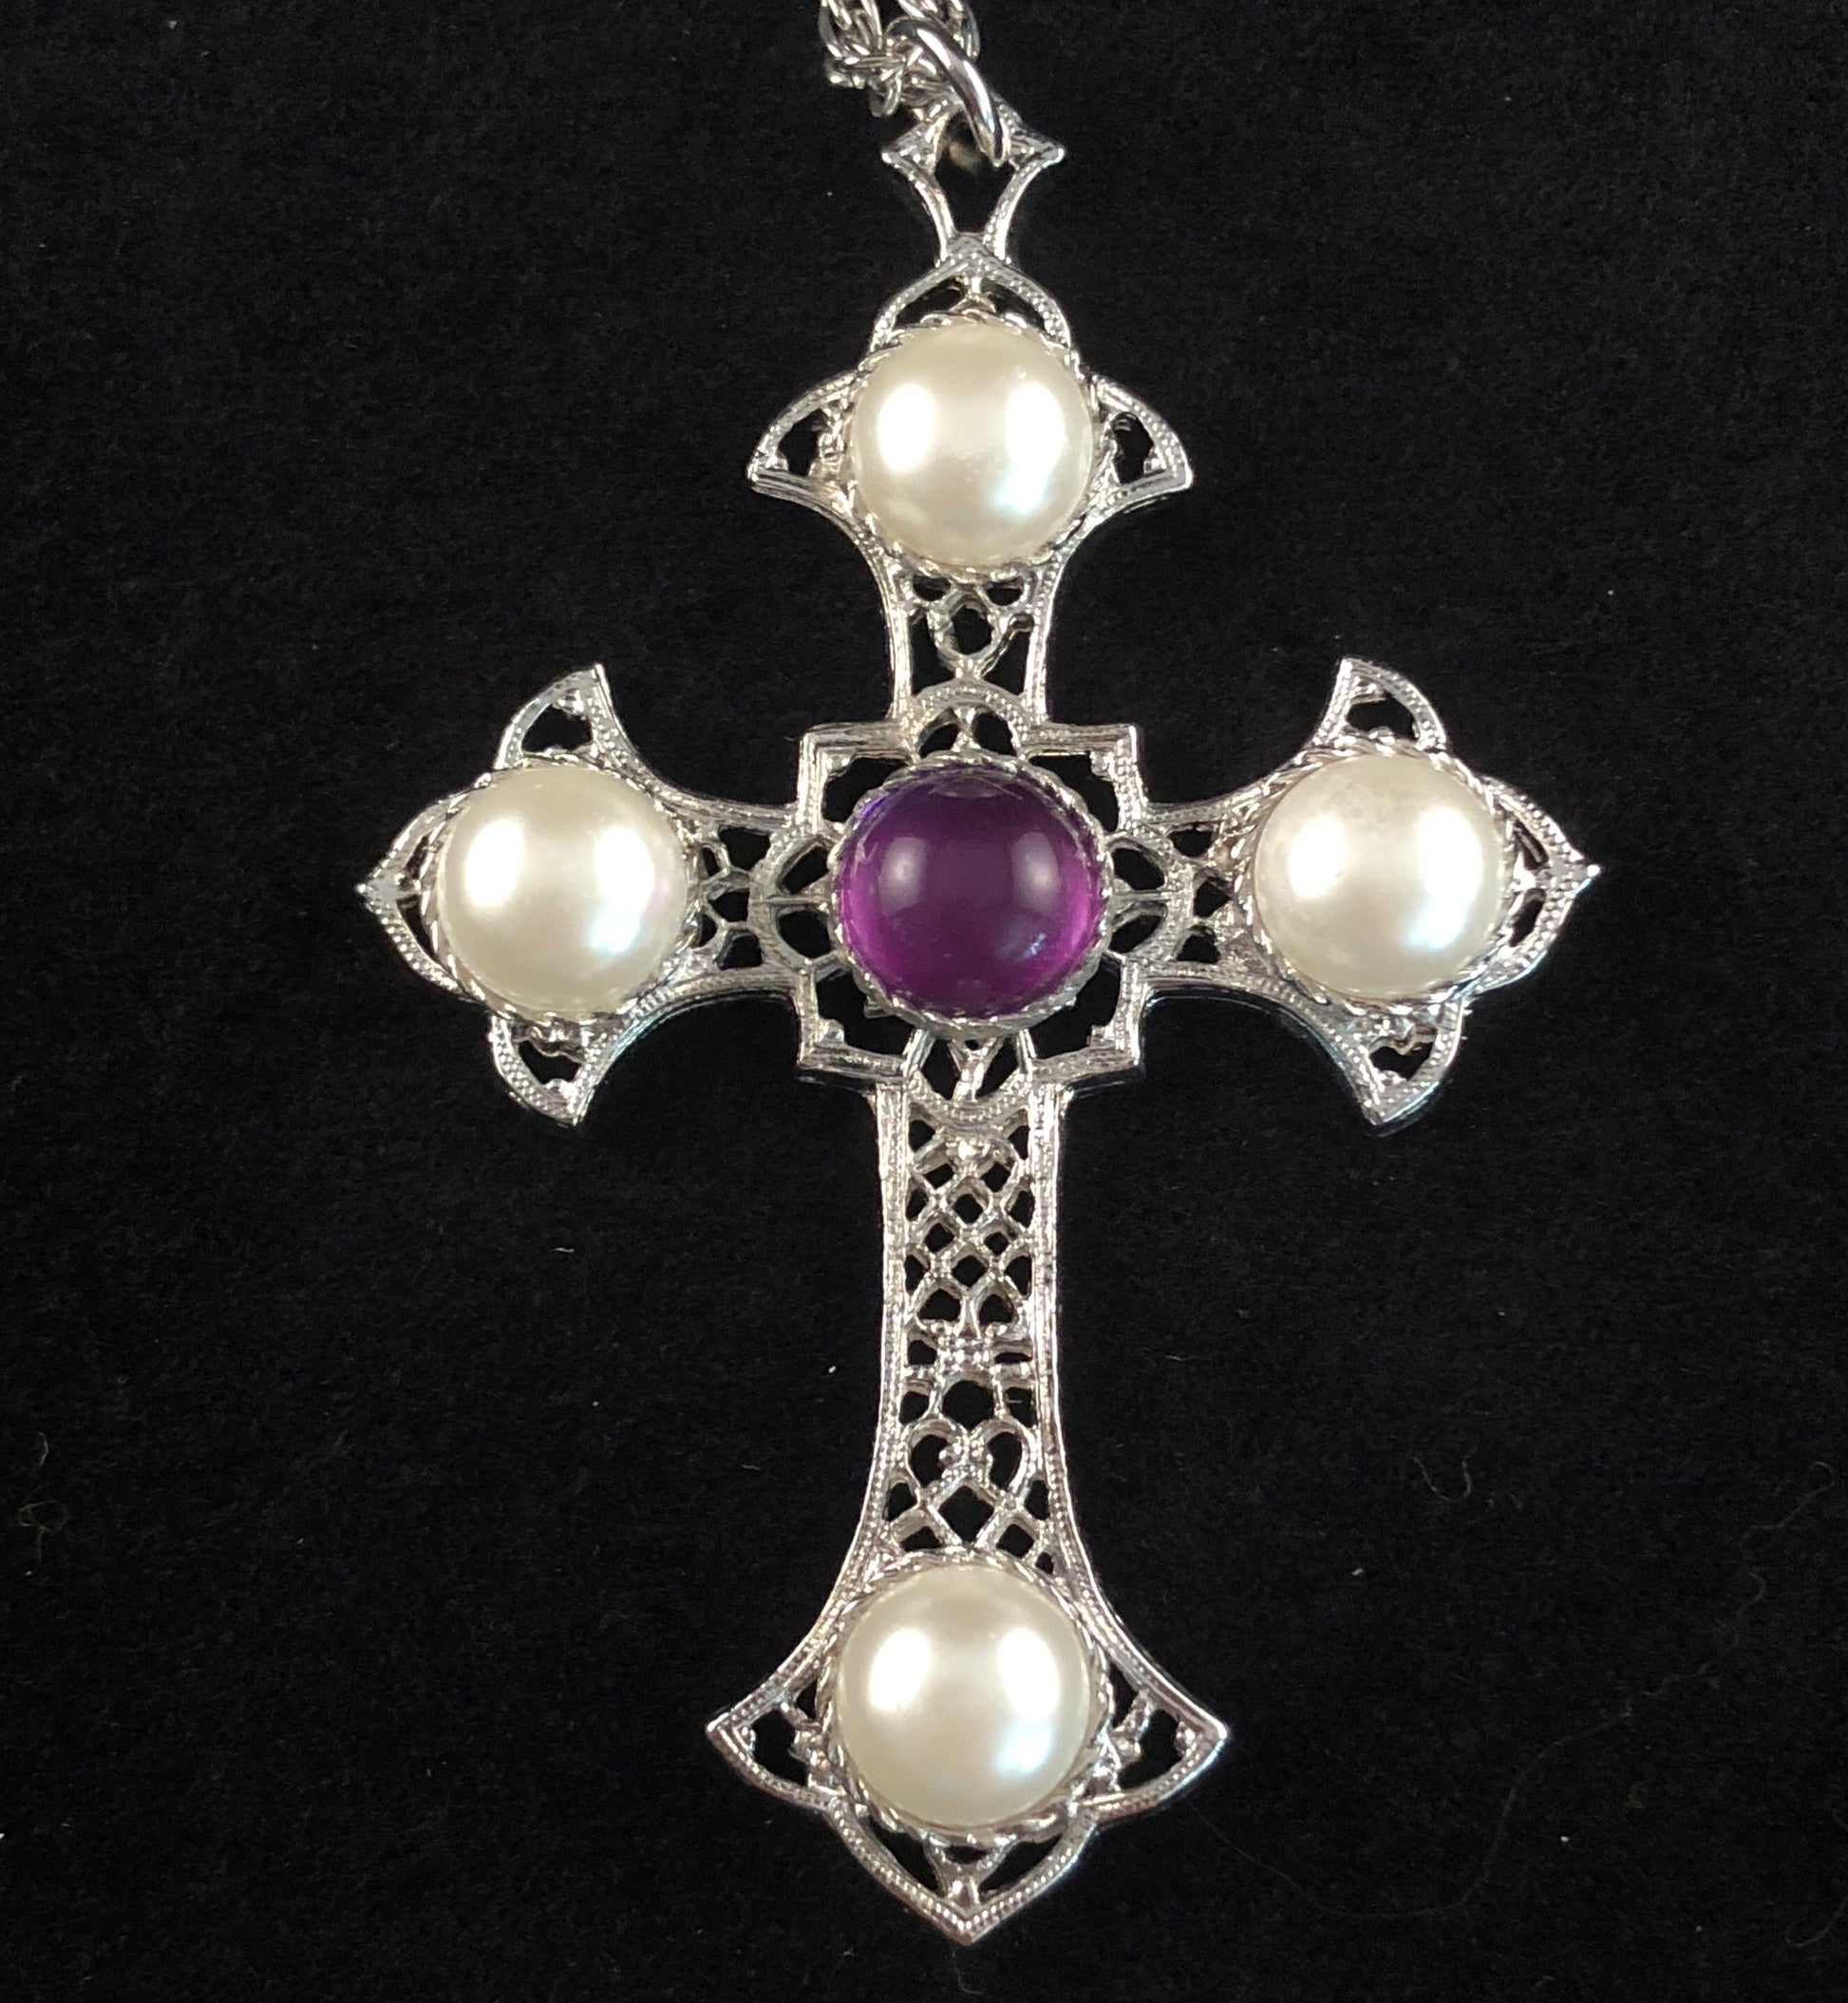 Early to Mid 70s Sarah Coventry Crusader Cross Necklace in Original Box - Retro Kandy Vintage